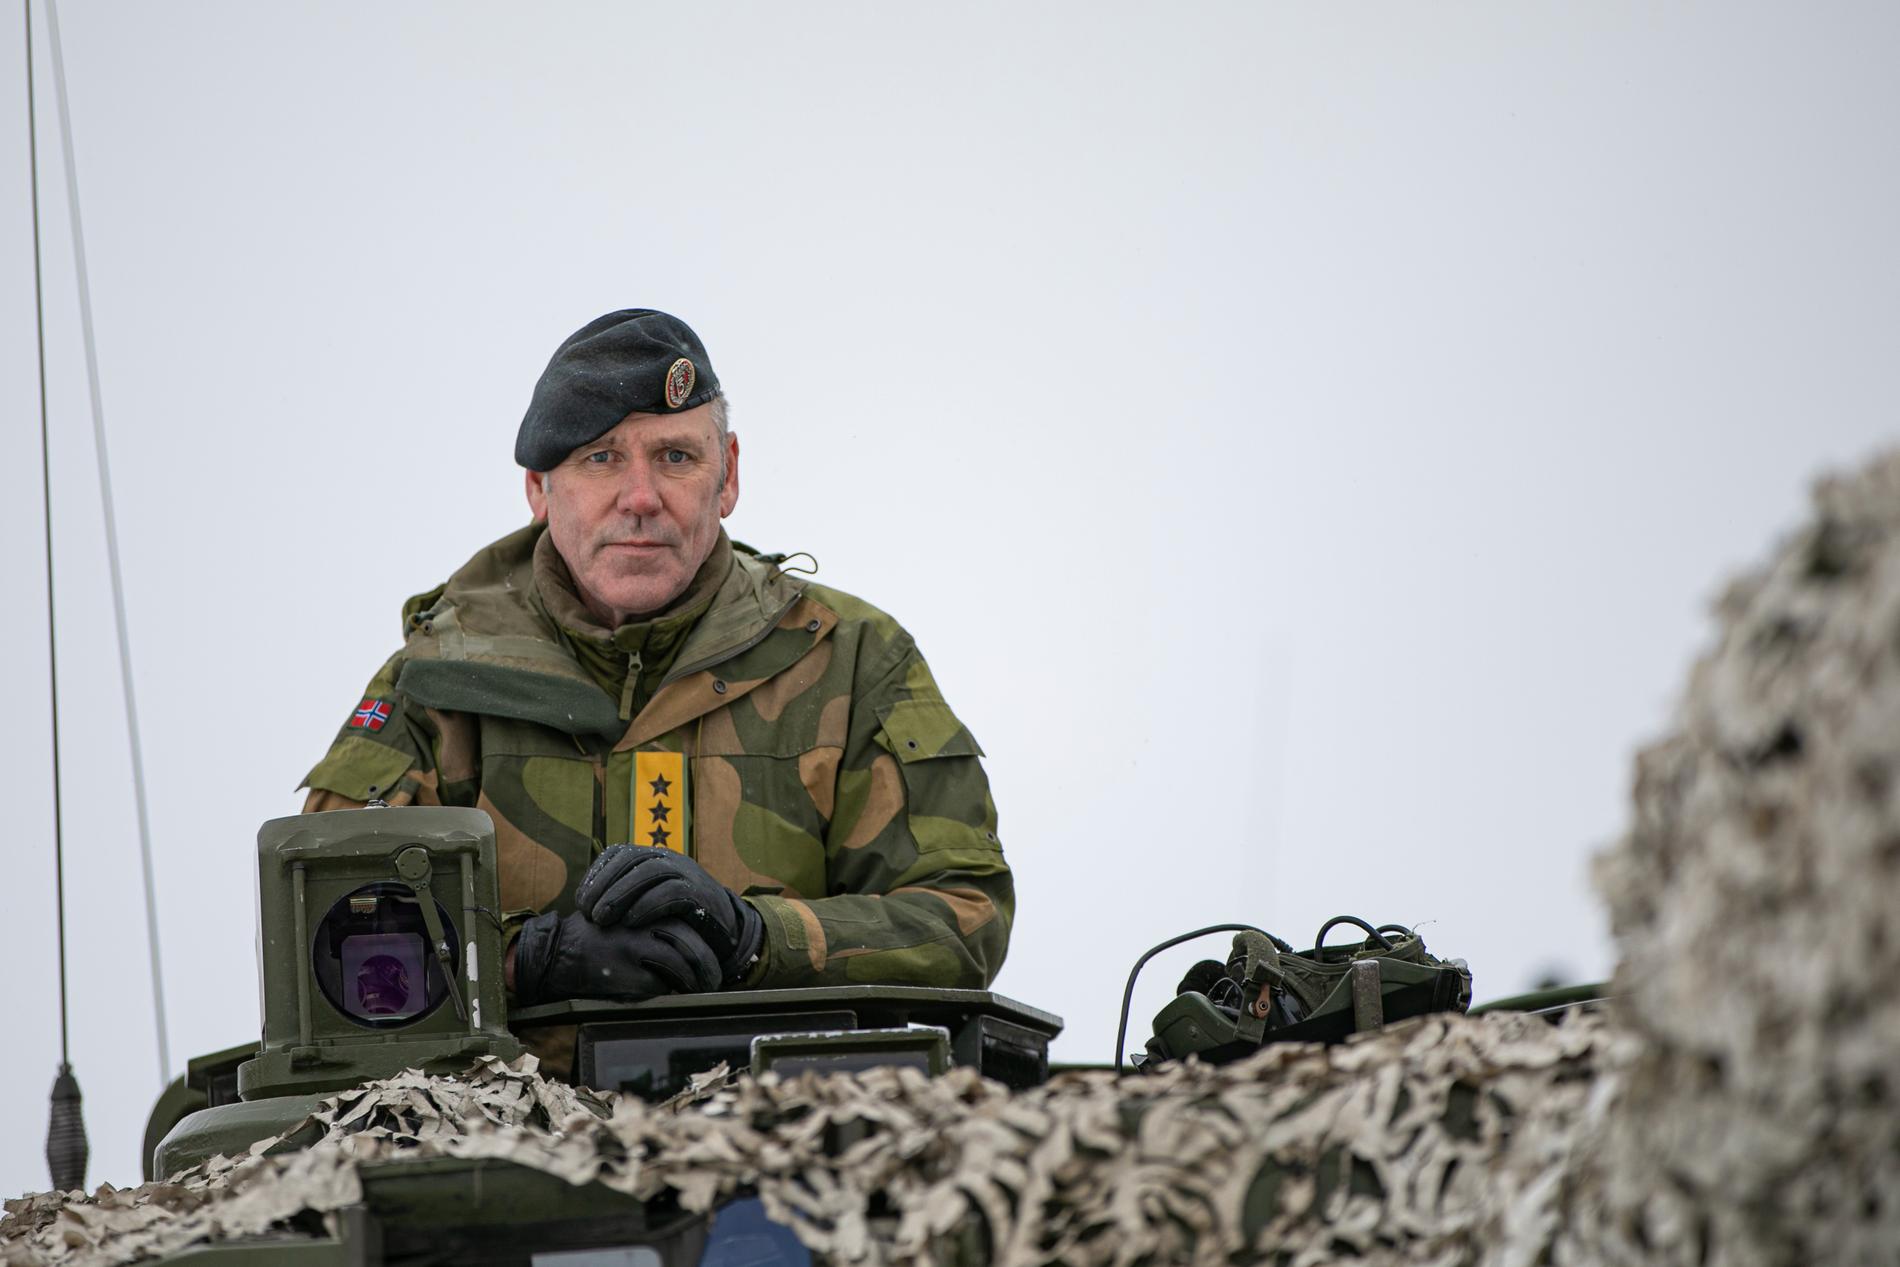 This is how the Russians will be stopped: the Norwegian Defense Forces will act as deterrents with Sweden and Finland